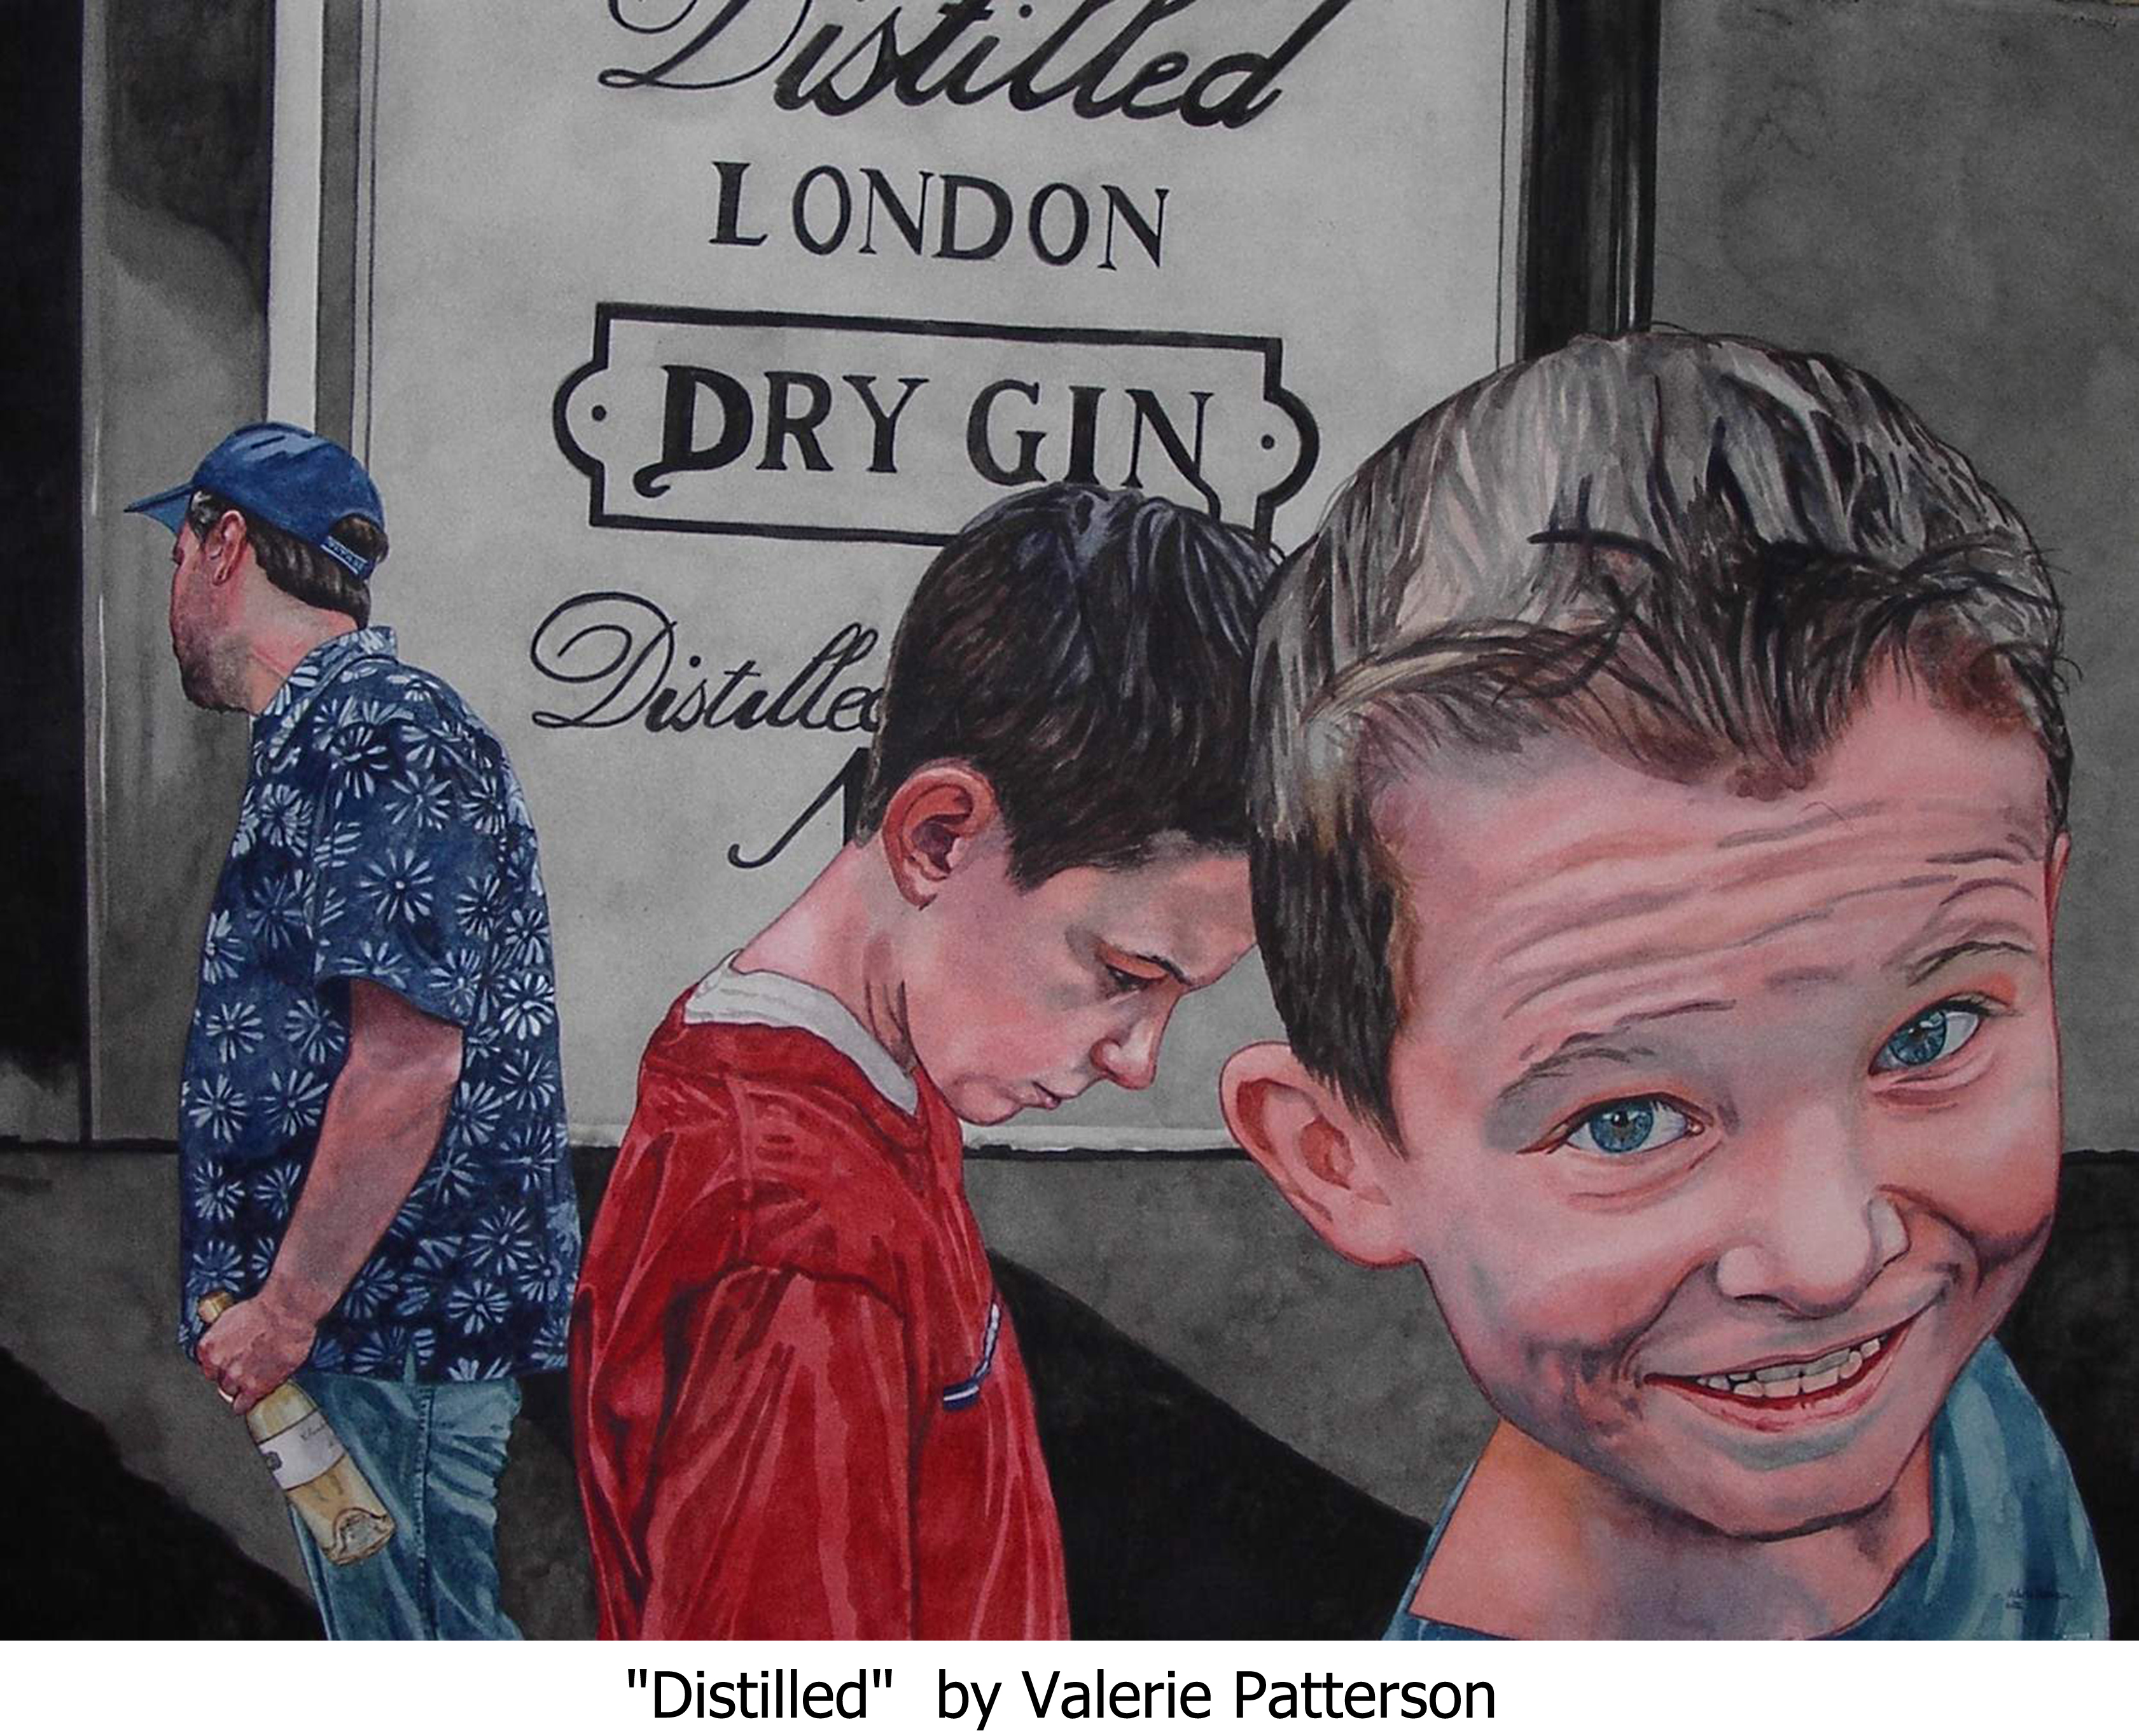 Distilled by Valerie Patterson